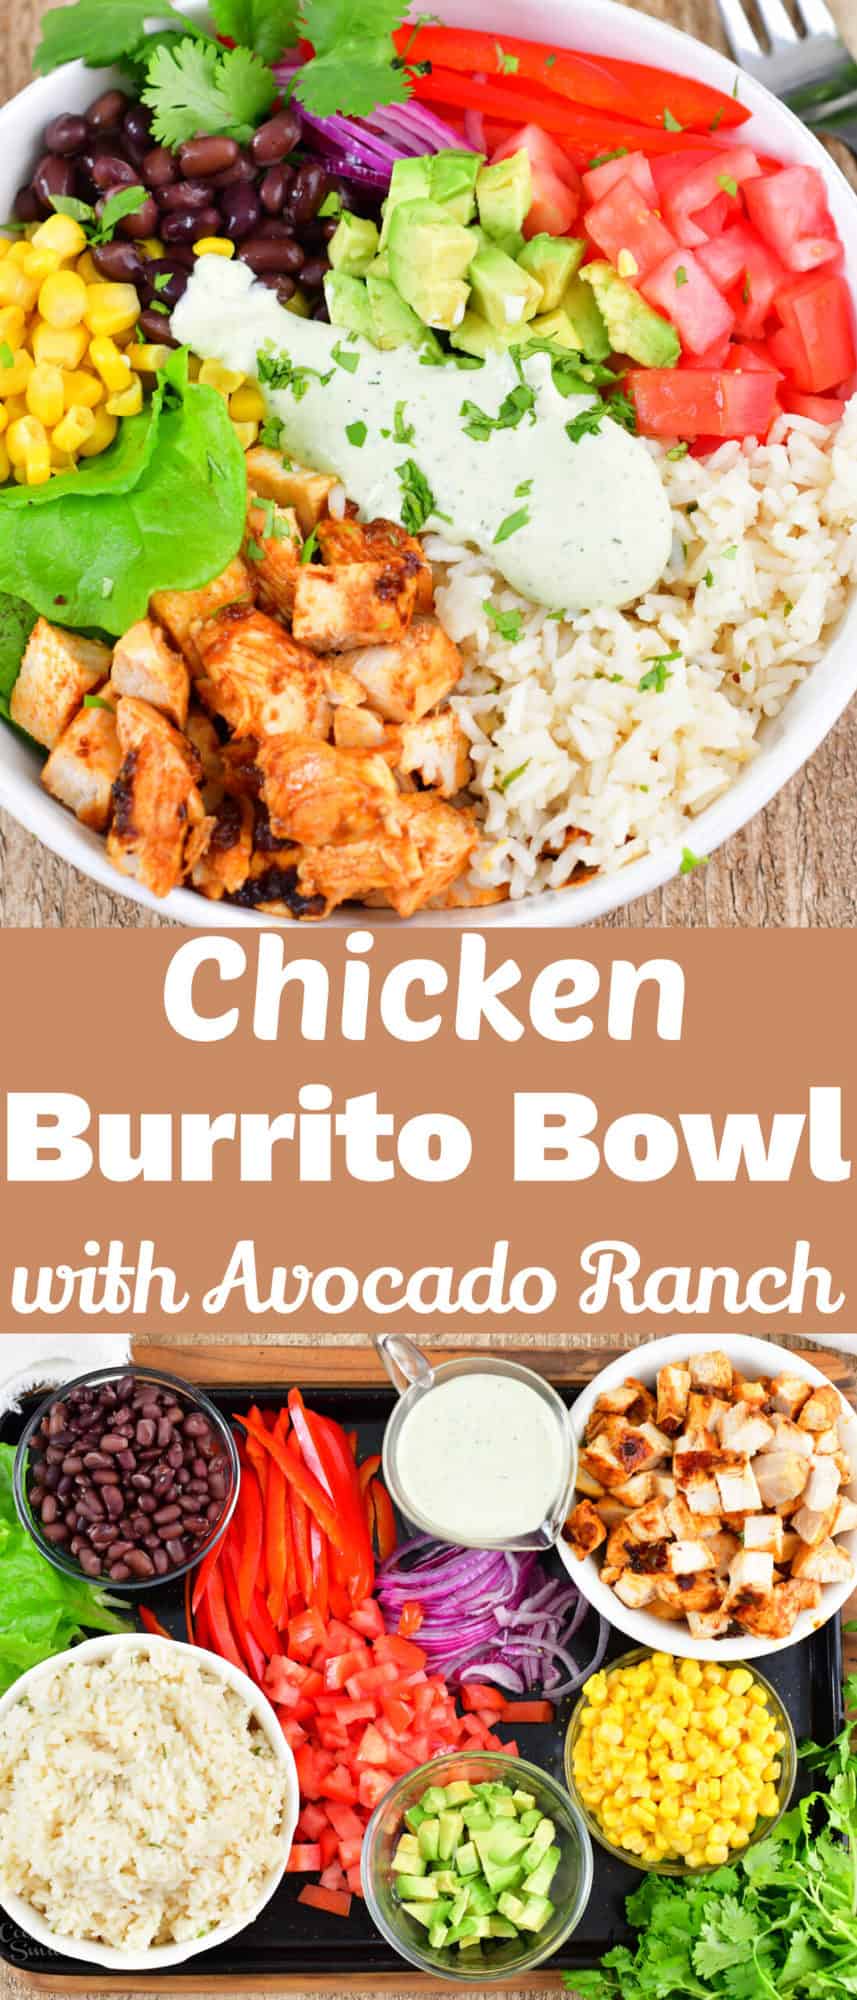 collage of chicken burrito bowl and ingredients for the bowl